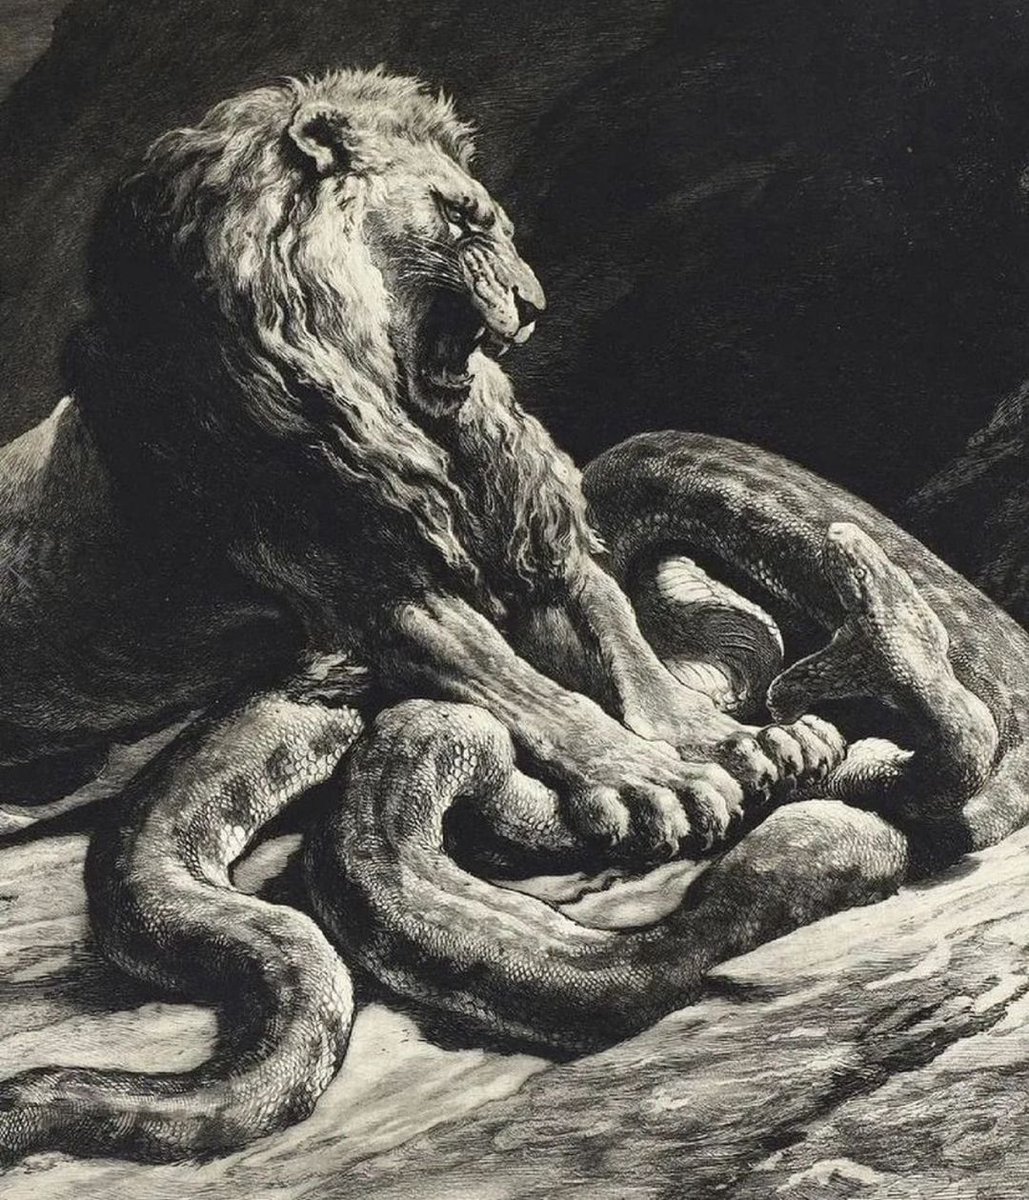 The Lion’s Triumph over the Python, 1919, by Herbert Thomas Dicksee